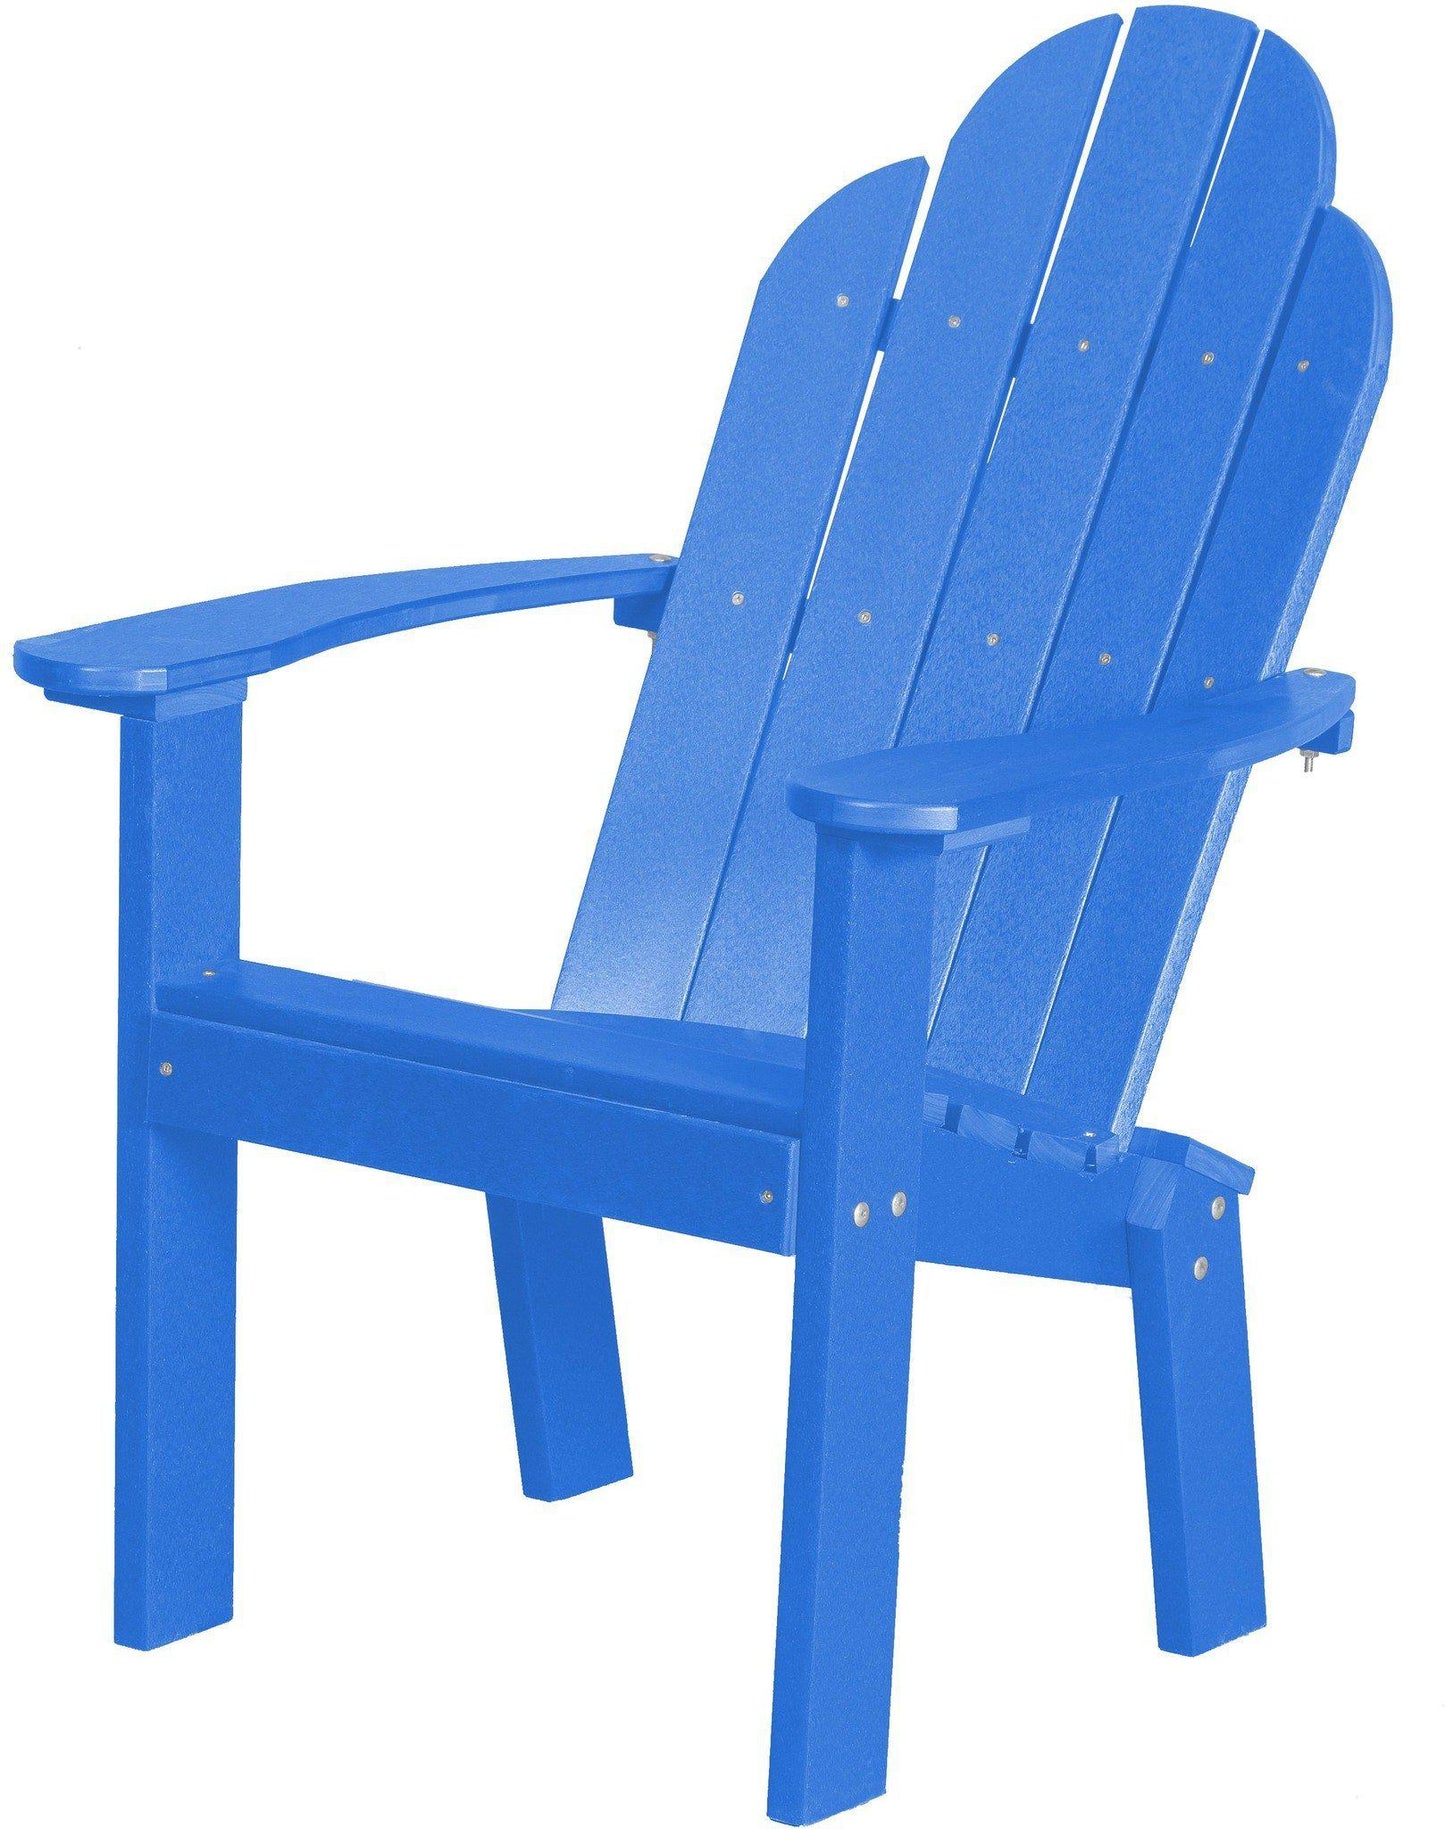 Wildridge Recycled Plastic Heritage Outdoor Dining / Deck Chair - LEAD TIME TO SHIP 4 WEEKS